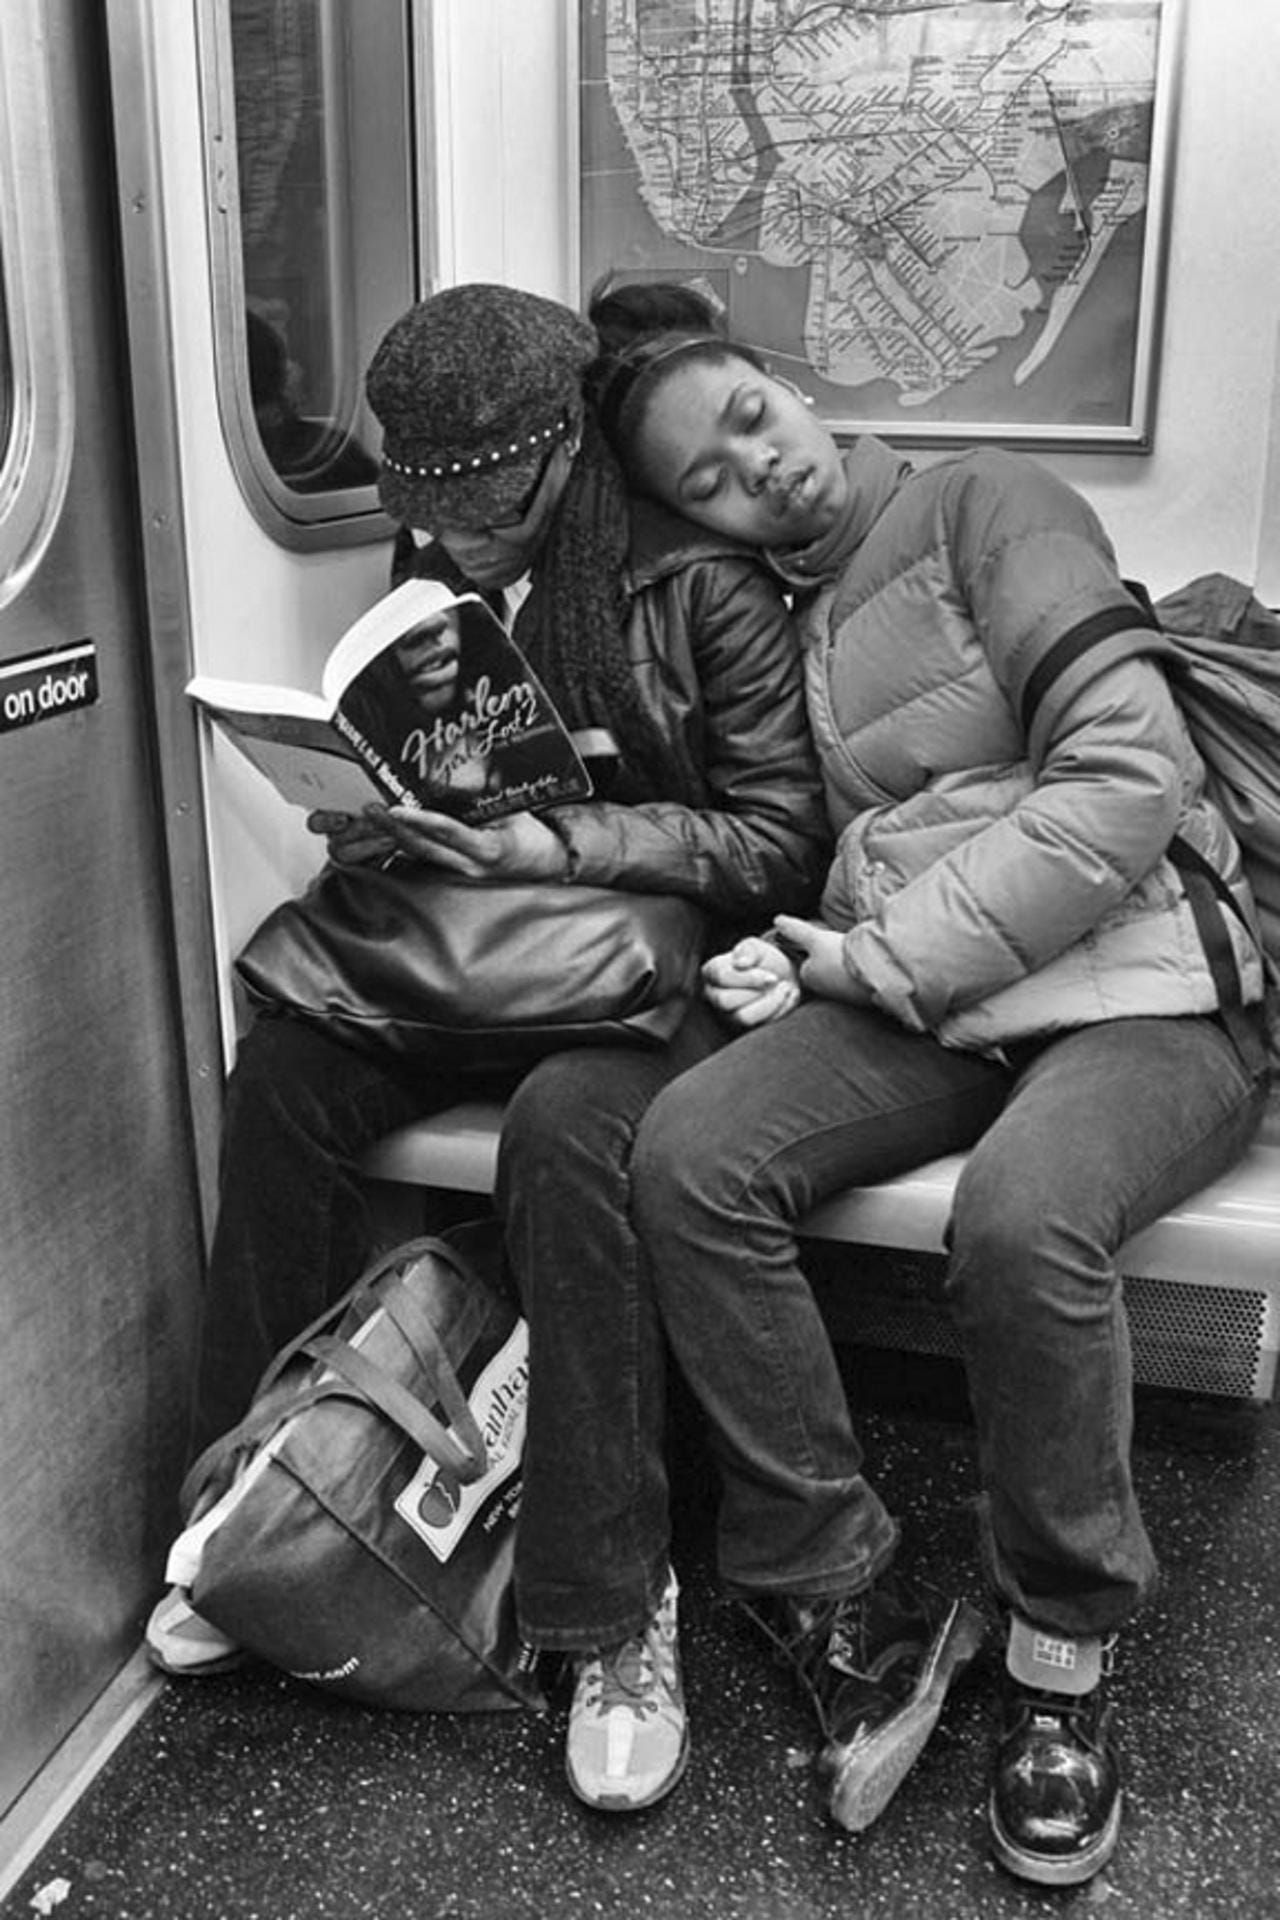 A woman reading on the #2 train while her daughter slumbers beside her.